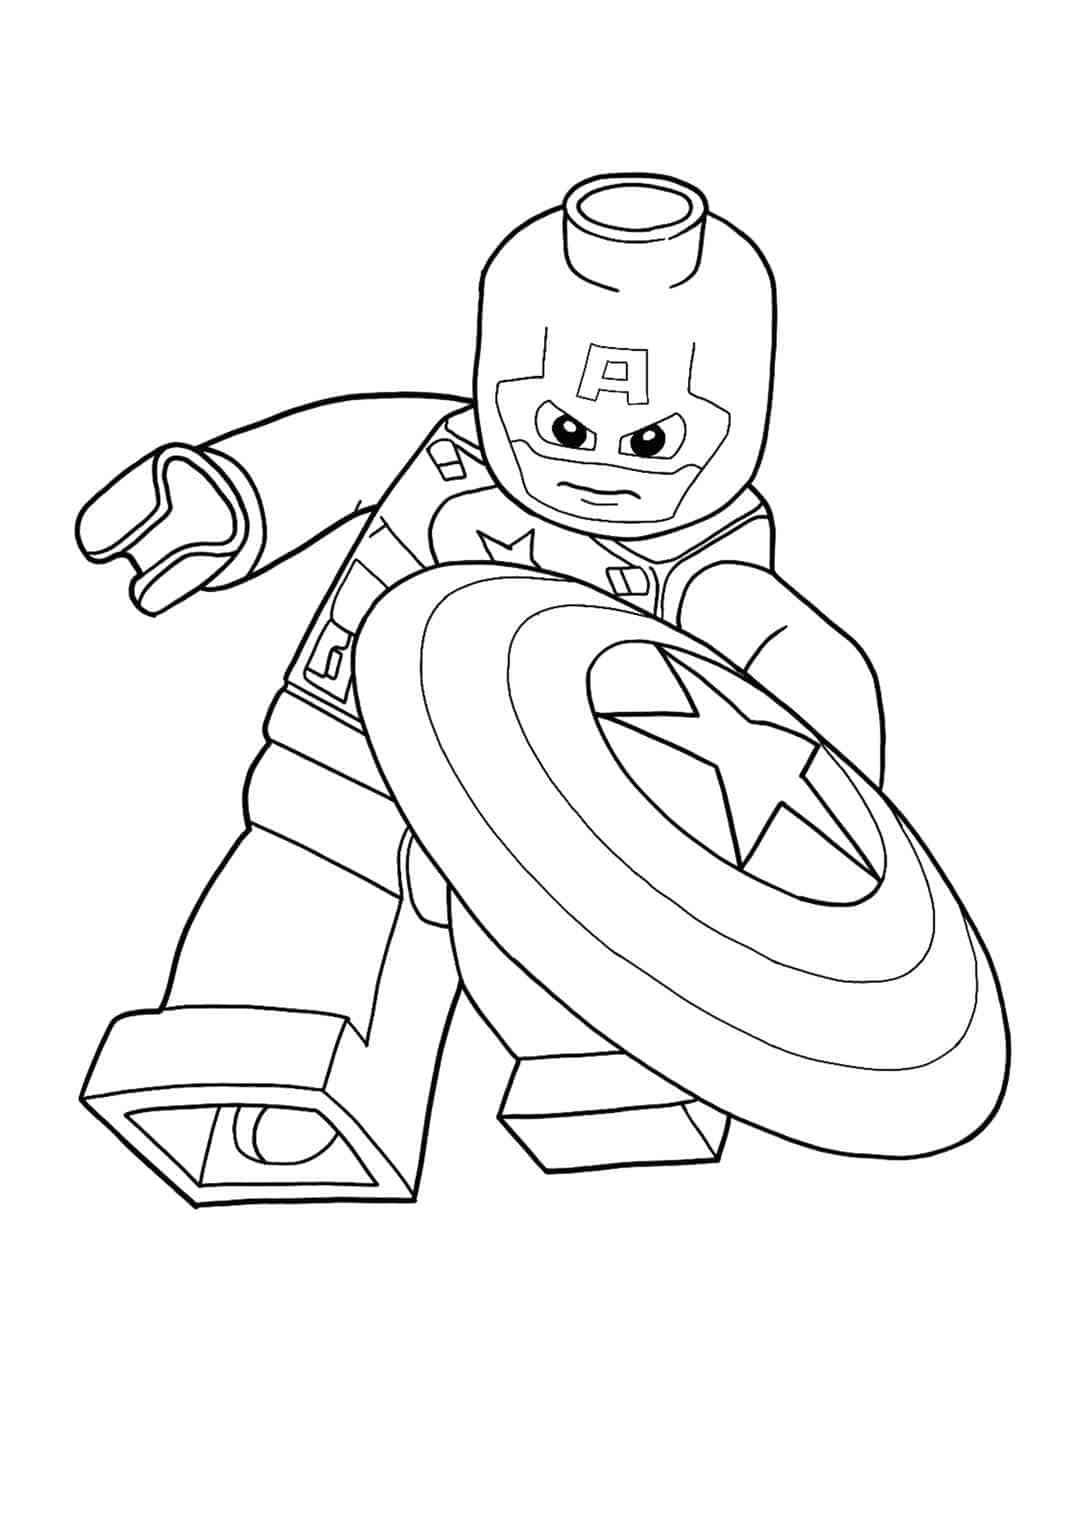 Captain America Lego free printable coloring page